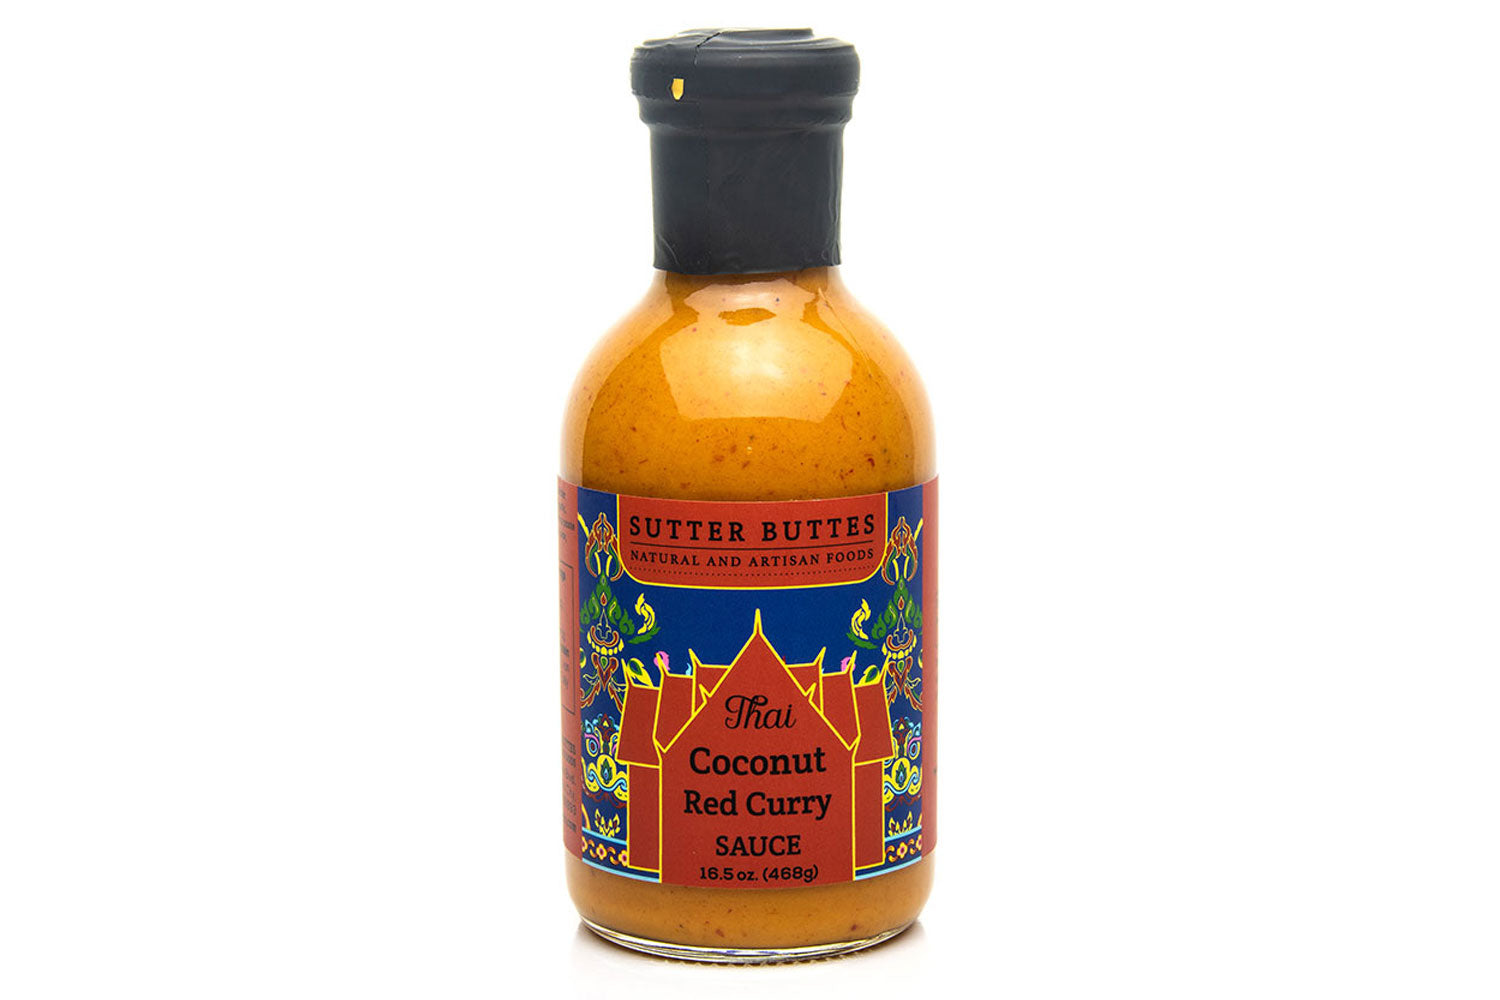 Sutter Buttes Thai Coconut Red Curry Sauce - Olive Oil Etcetera 